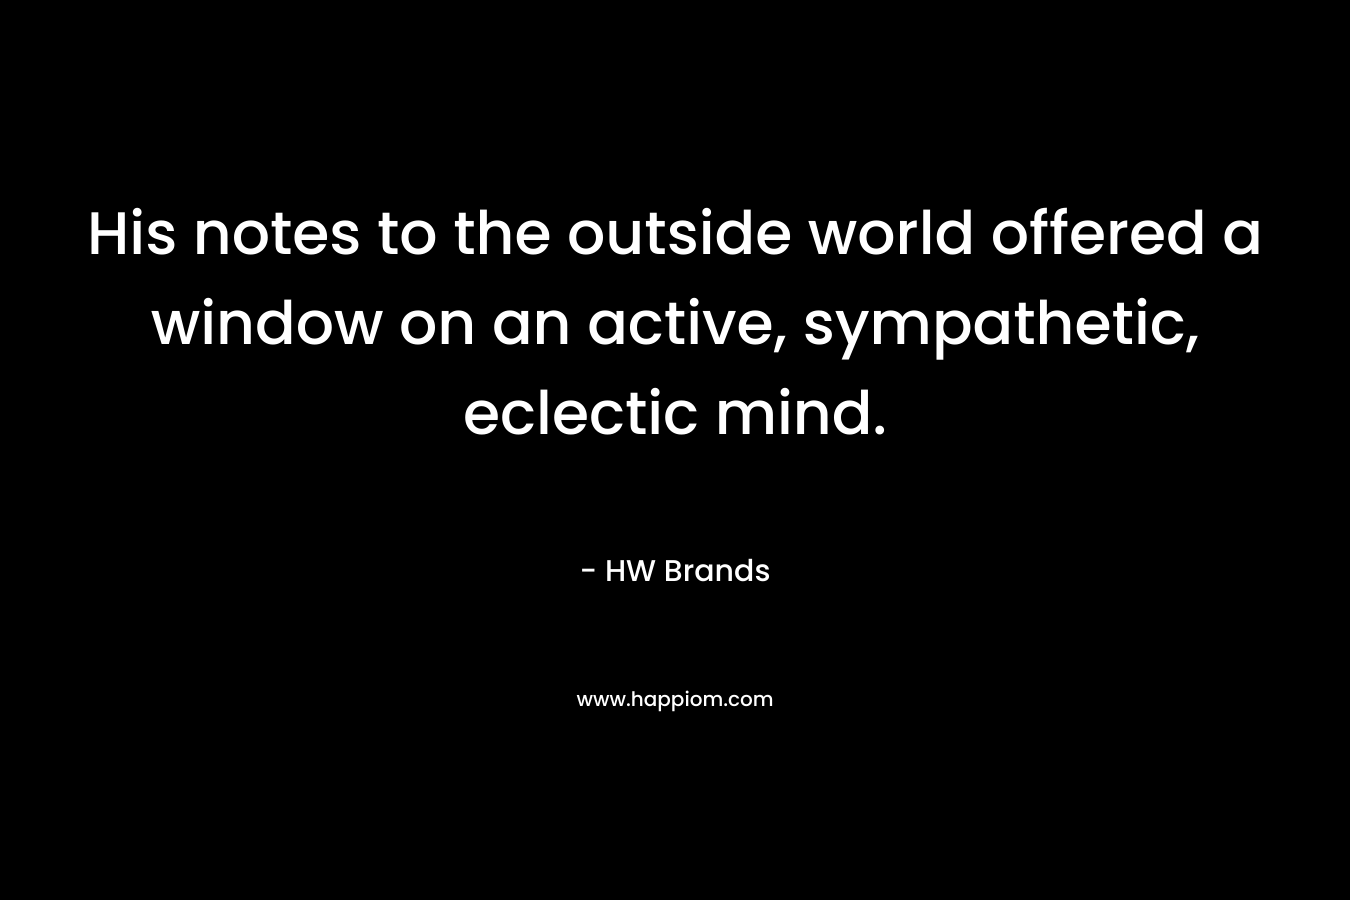 His notes to the outside world offered a window on an active, sympathetic, eclectic mind. – HW Brands